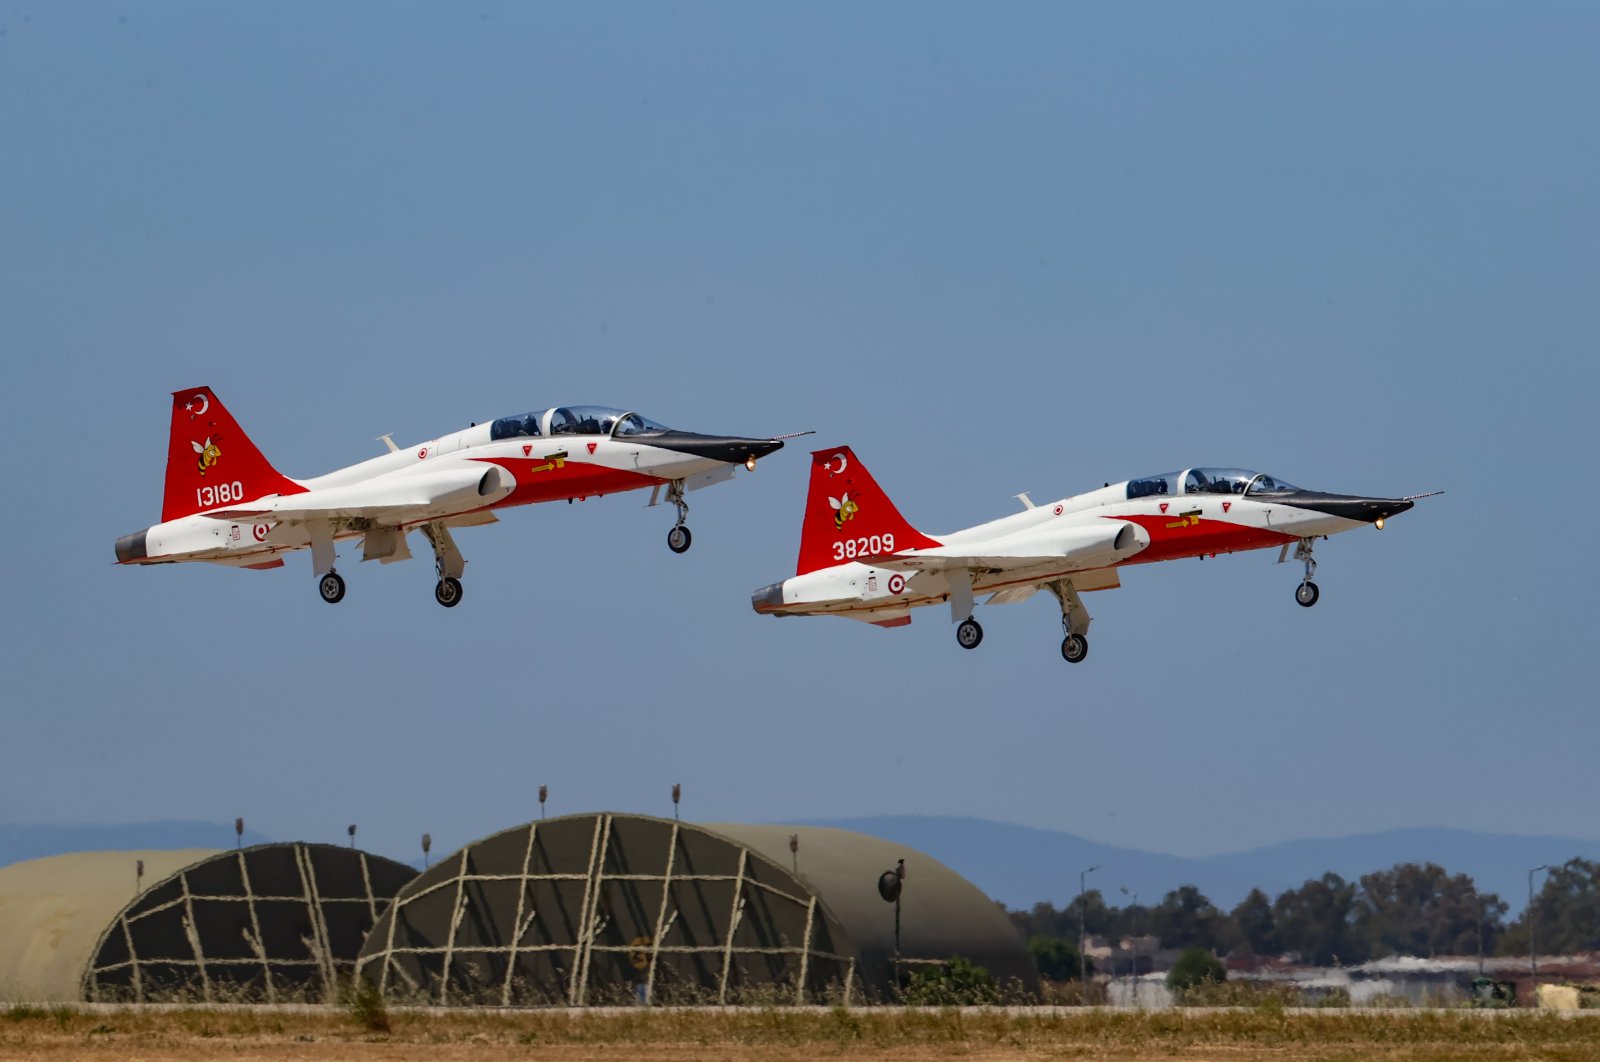 Two aircraft fly during a training session in Izmir, western Turkey, July 29, 2022. (AA PHOTO)